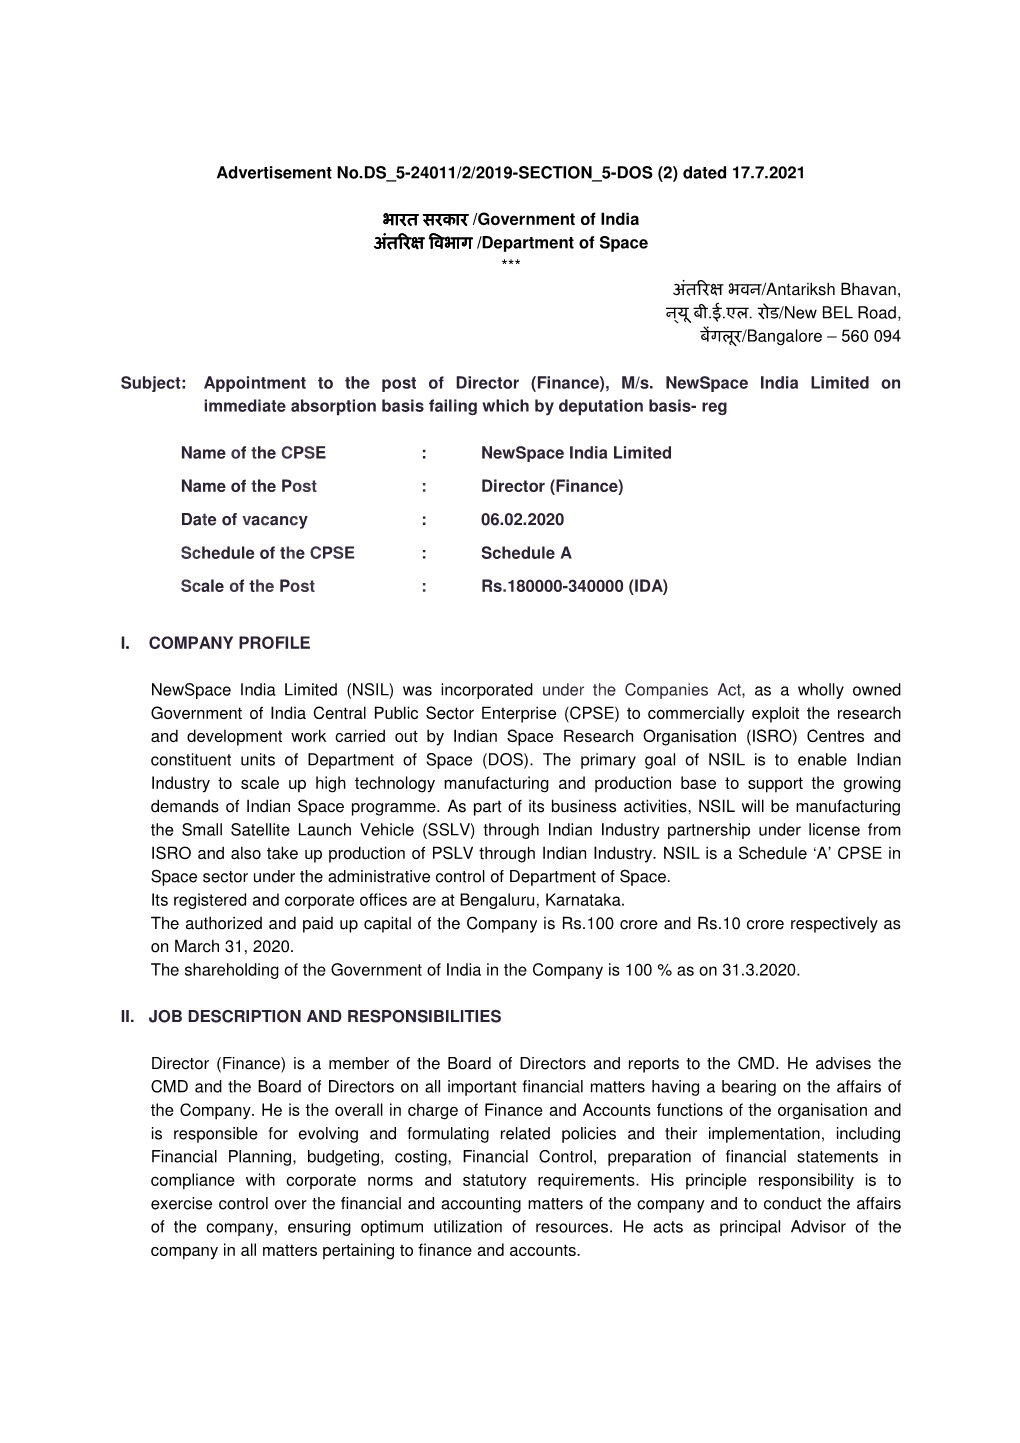 Advertisement No.DS 5-24011/2/2019-SECTION 5-DOS (2) Dated 17.7.2021